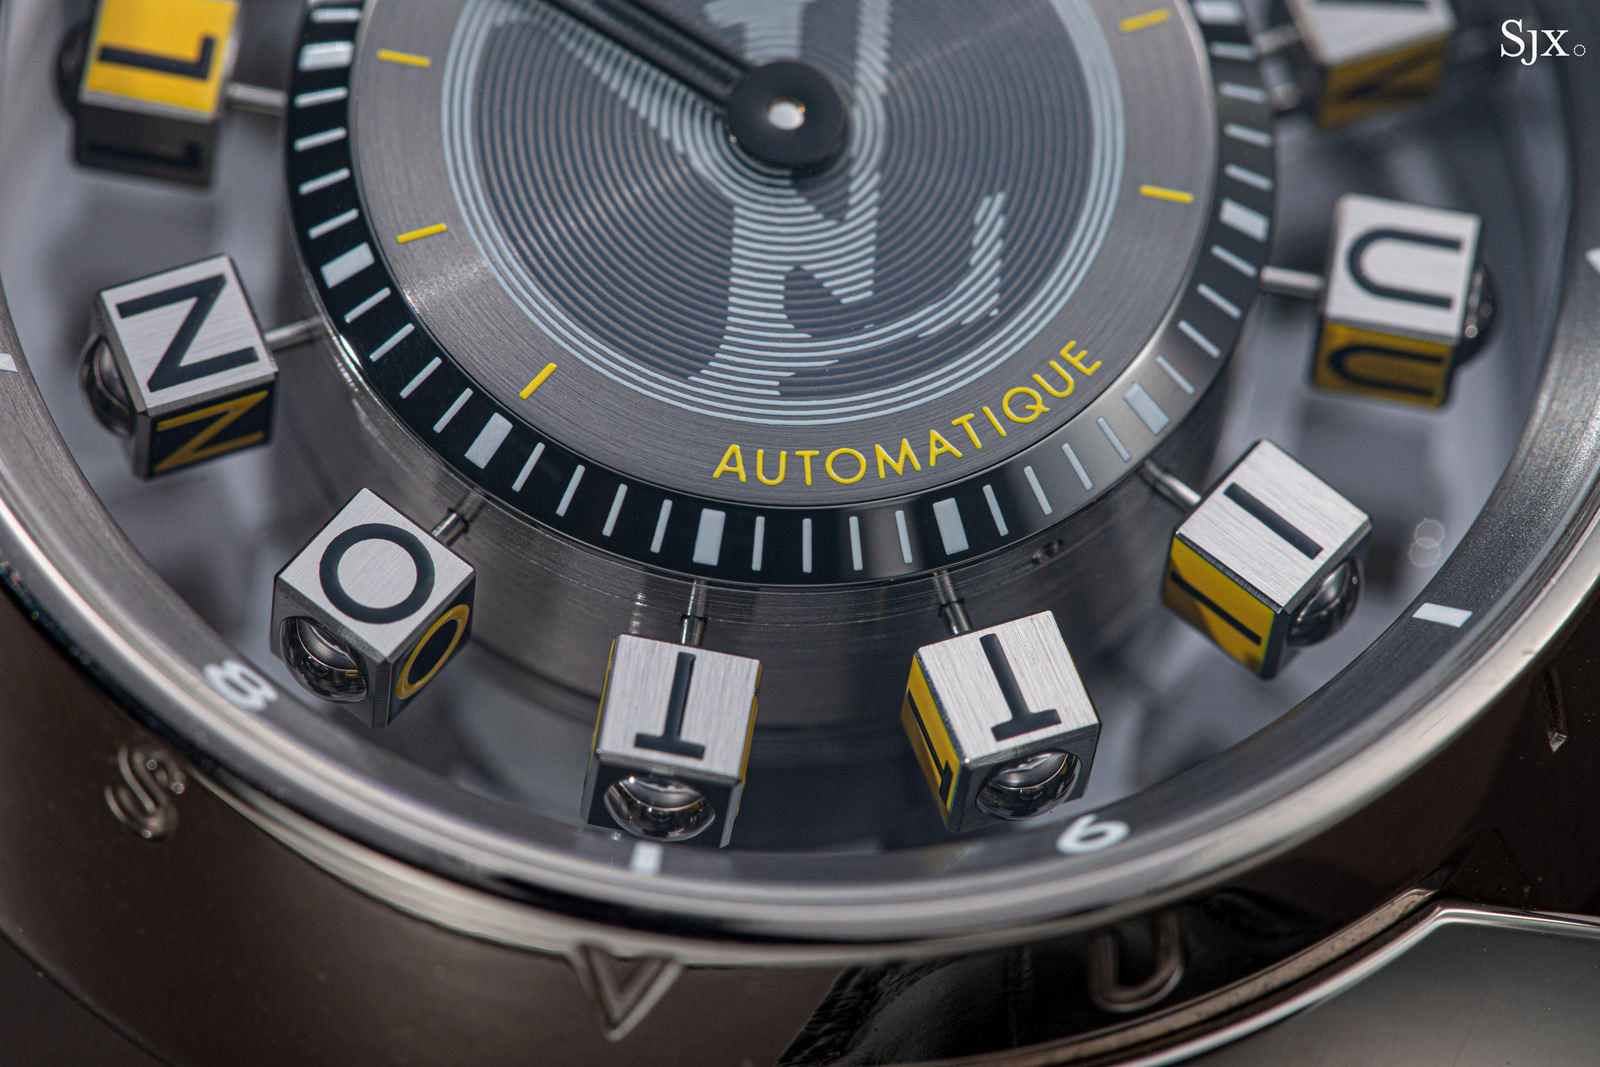 Hands-On Debut: Louis Vuitton Tambour Spin Time Air Quantum Watch